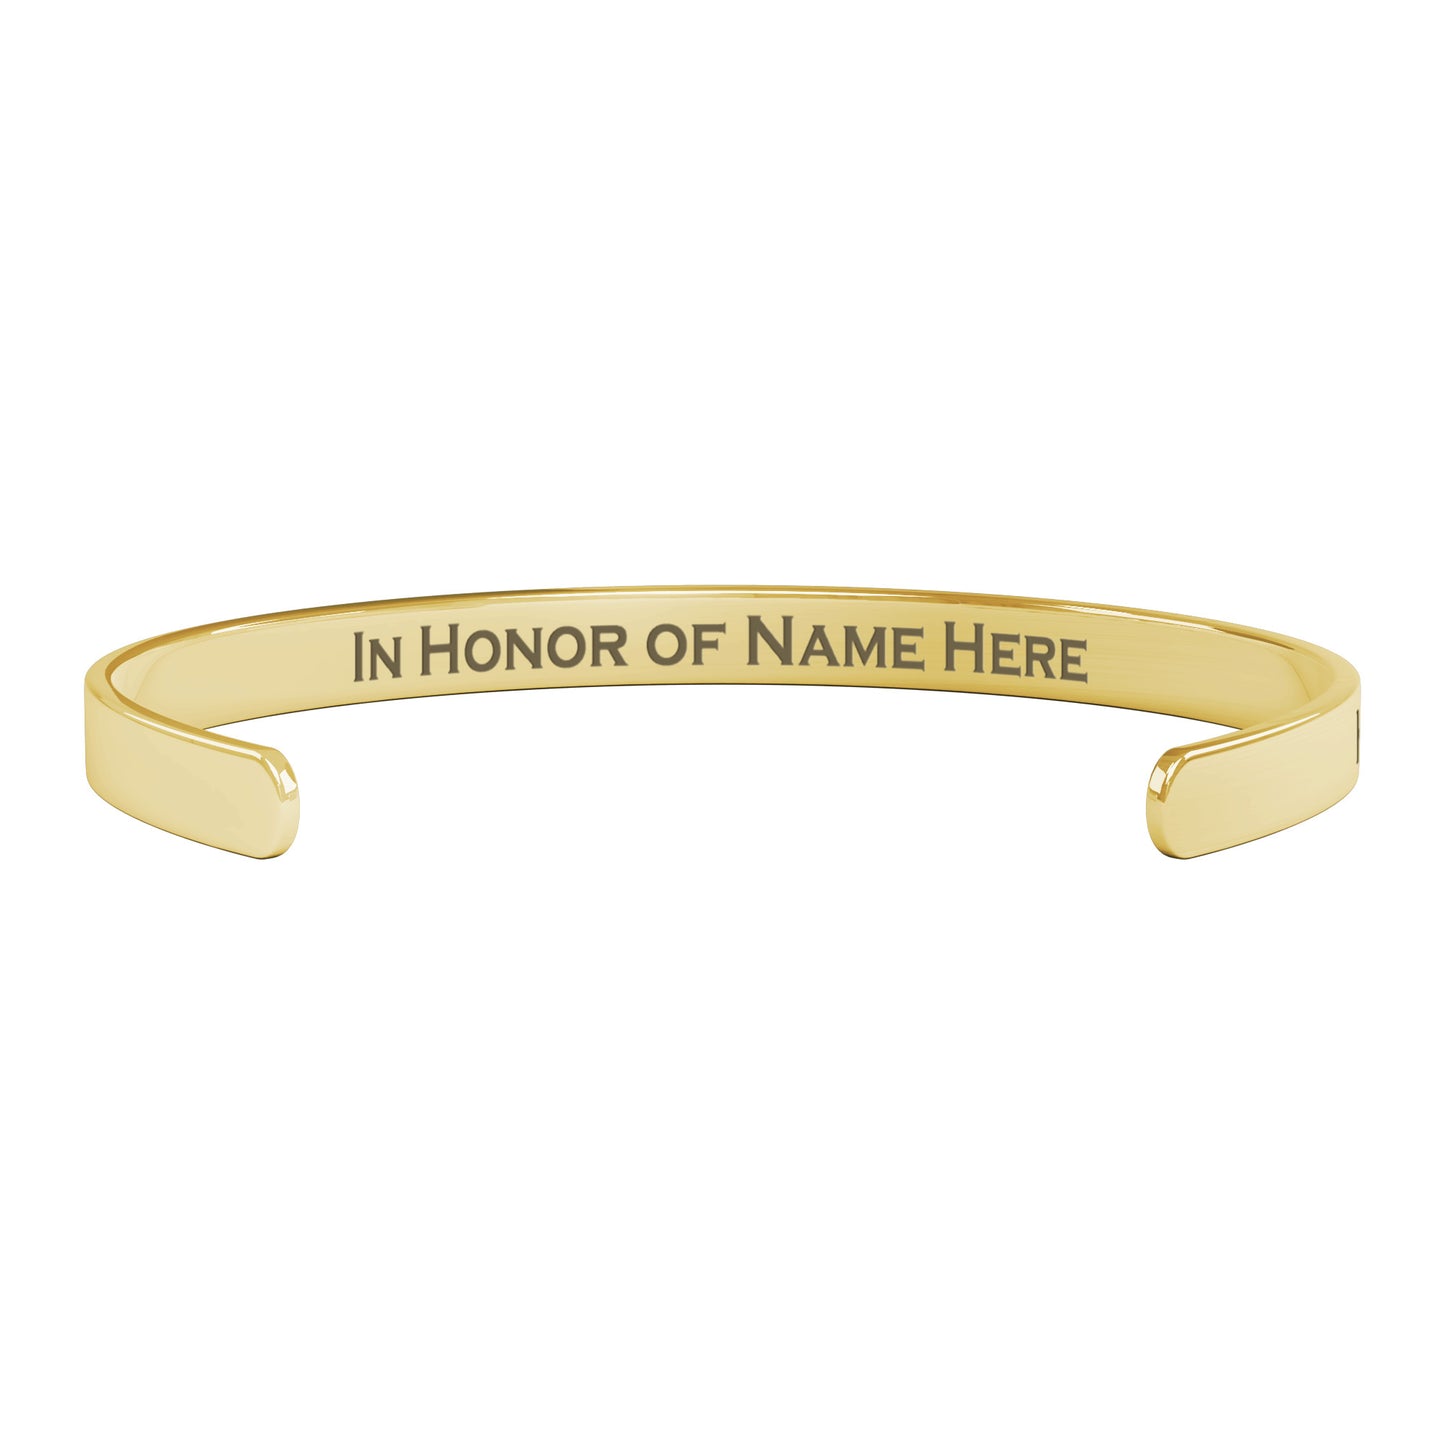 Personalized Head and Neck Cancer Awareness Cuff Bracelet